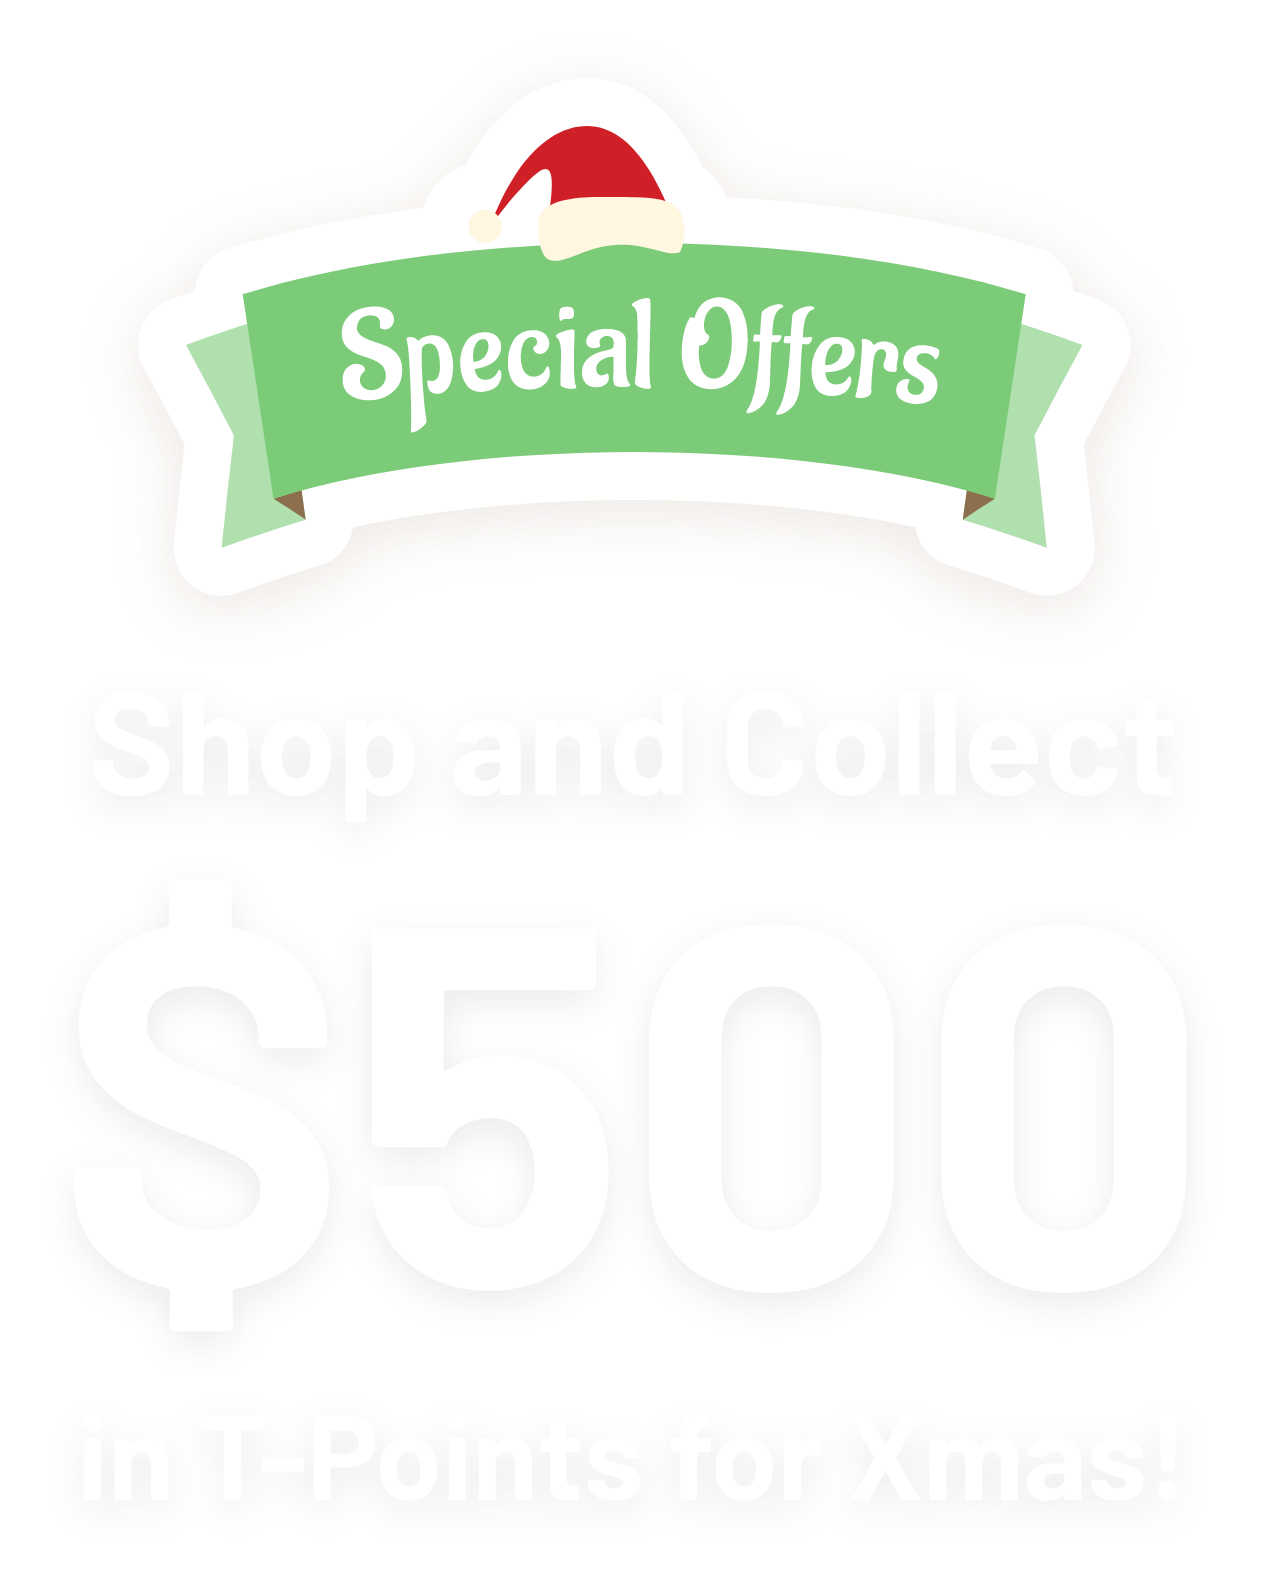 Shop and collect $500 T-Points